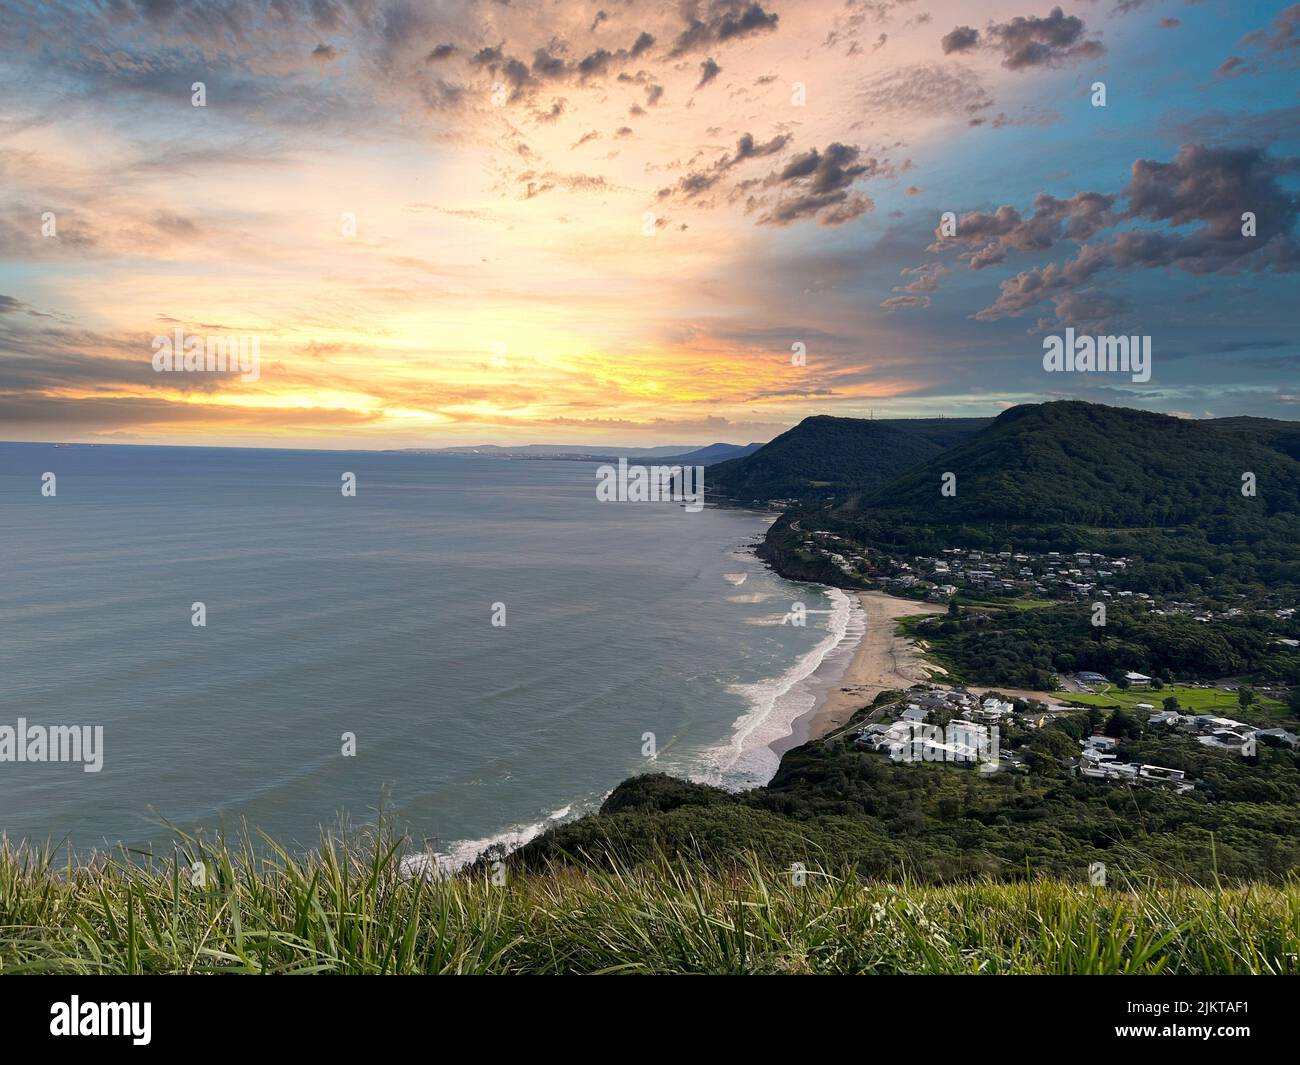 A scenic sunset view of the coastline of Stanwell Park from Bald Hill Lookout, New South Wales, Australia Stock Photo